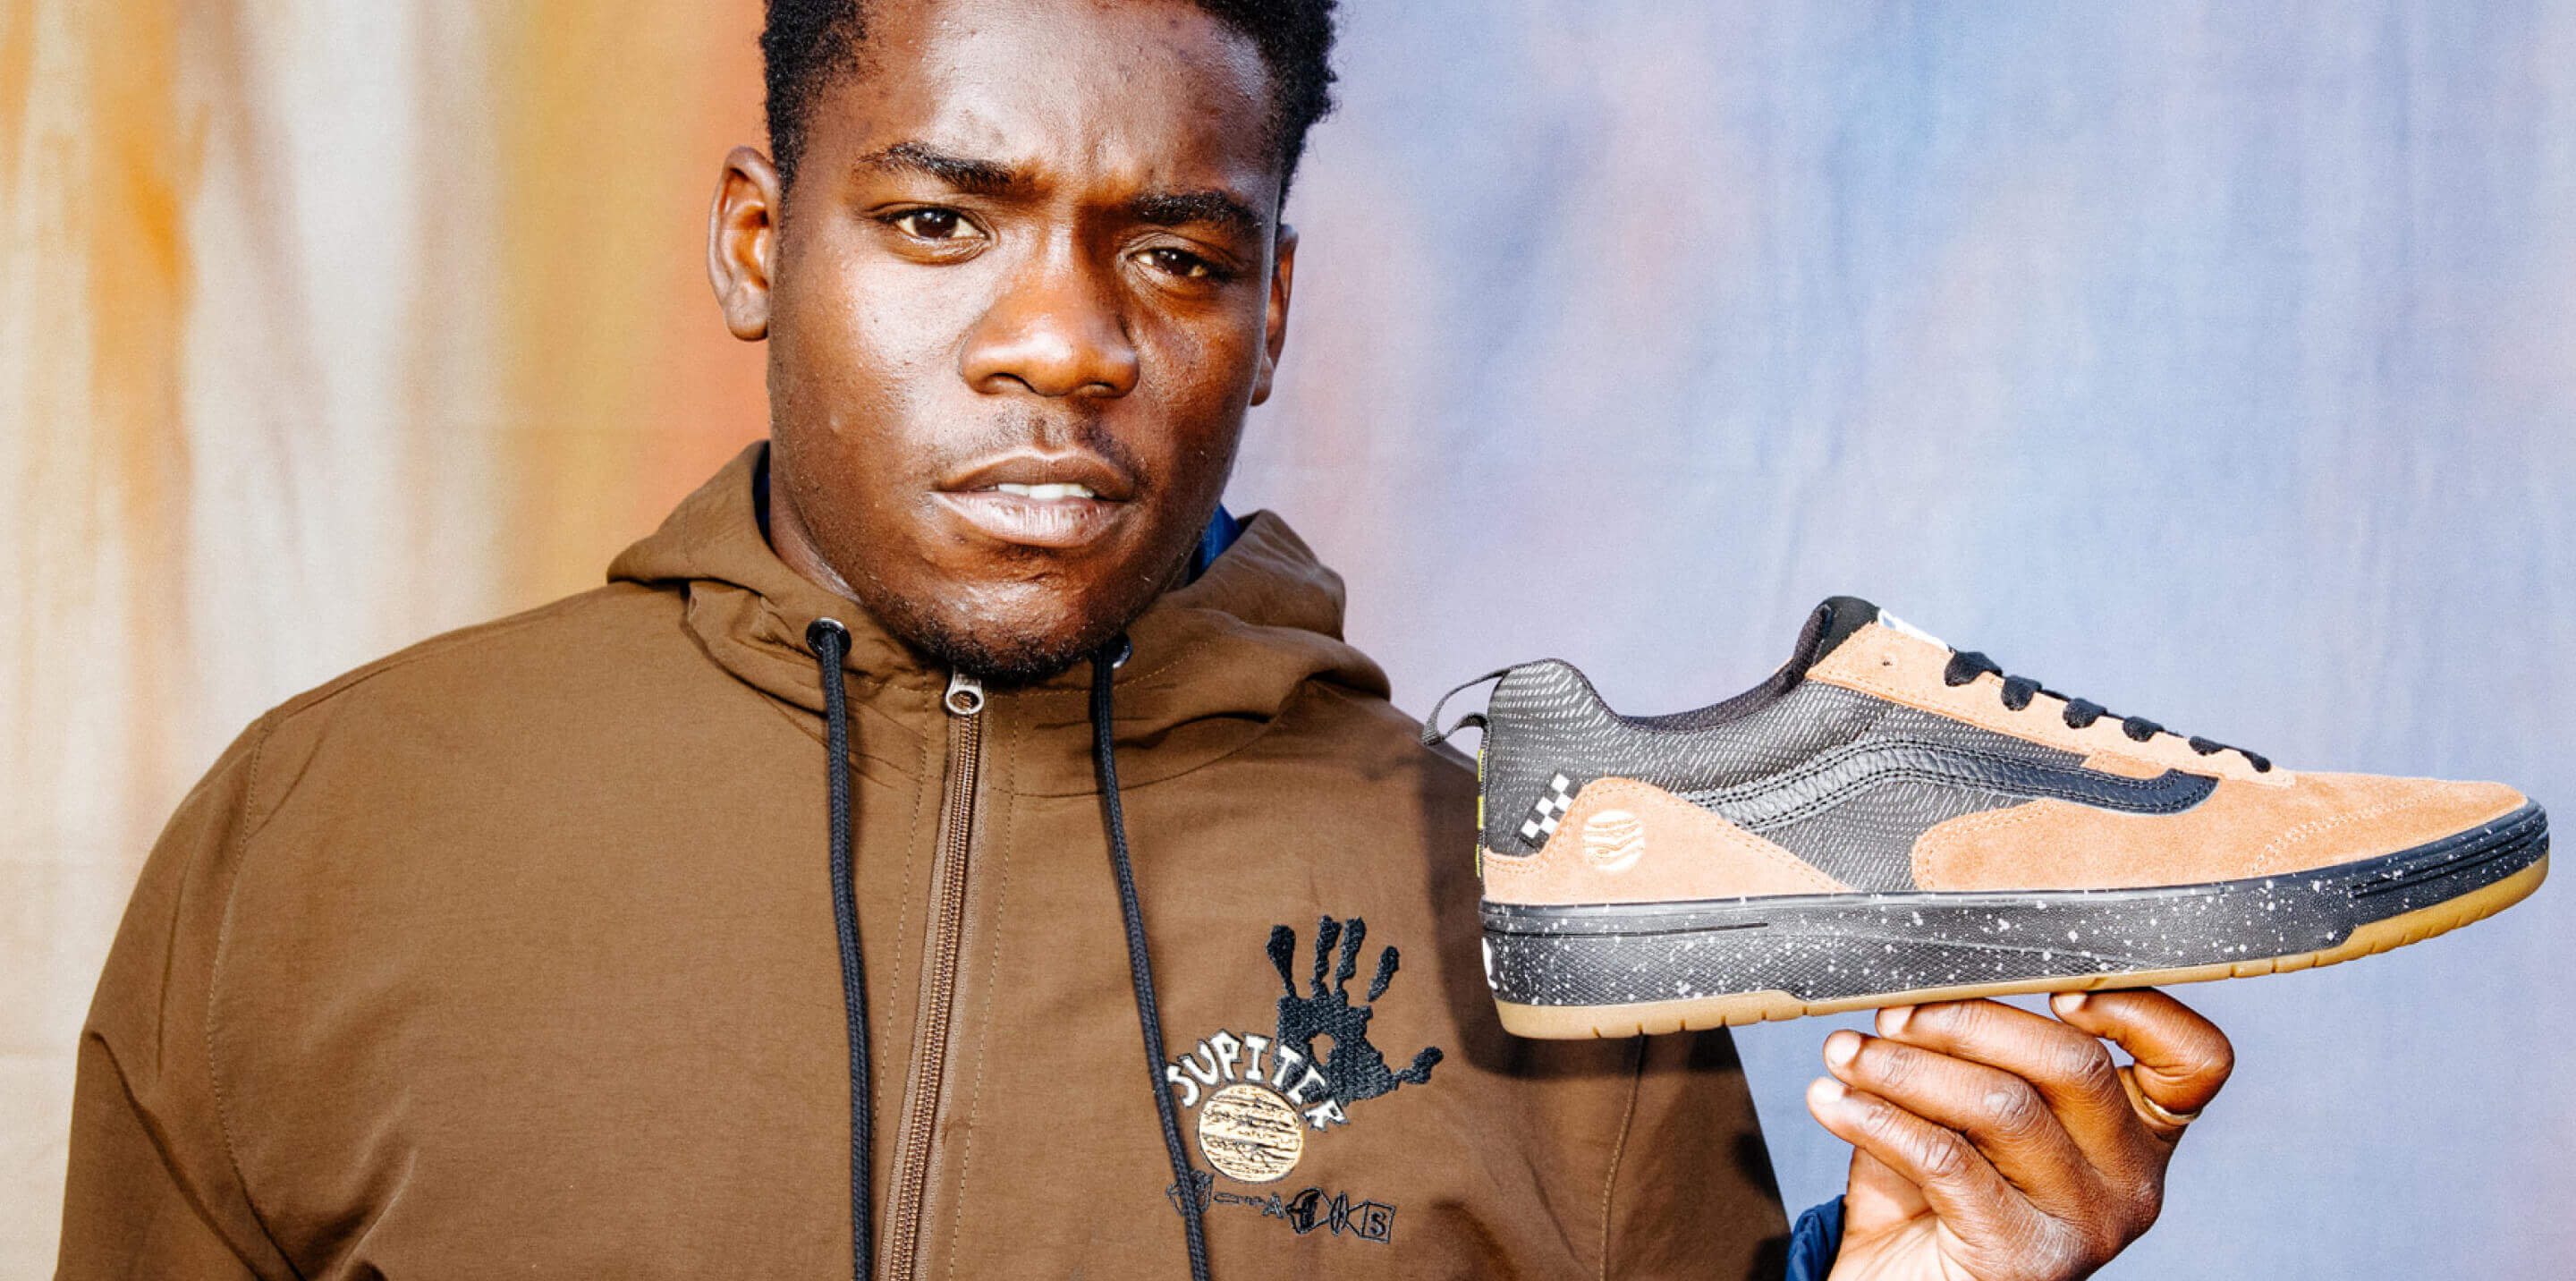 Zion Wright holding Le Zahba shoe with the Zion colorway.